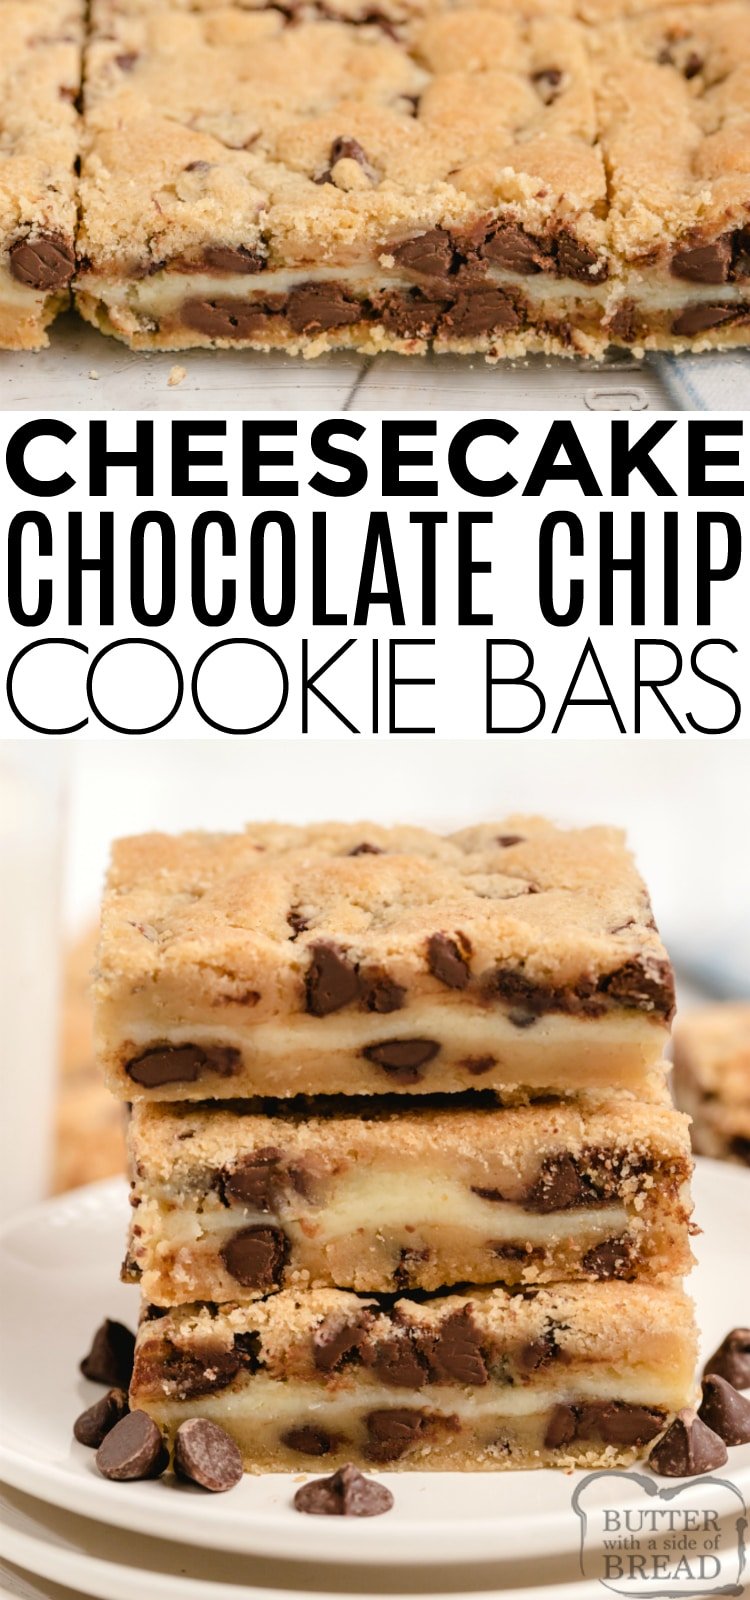 Cheesecake Chocolate Chip Cookie Bars combine a delicious chocolate chip cookie recipe with a layer of cheesecake to make a dessert that is the best of both worlds! This amazing bar cookie recipe is simple to make and a hit at every party! 